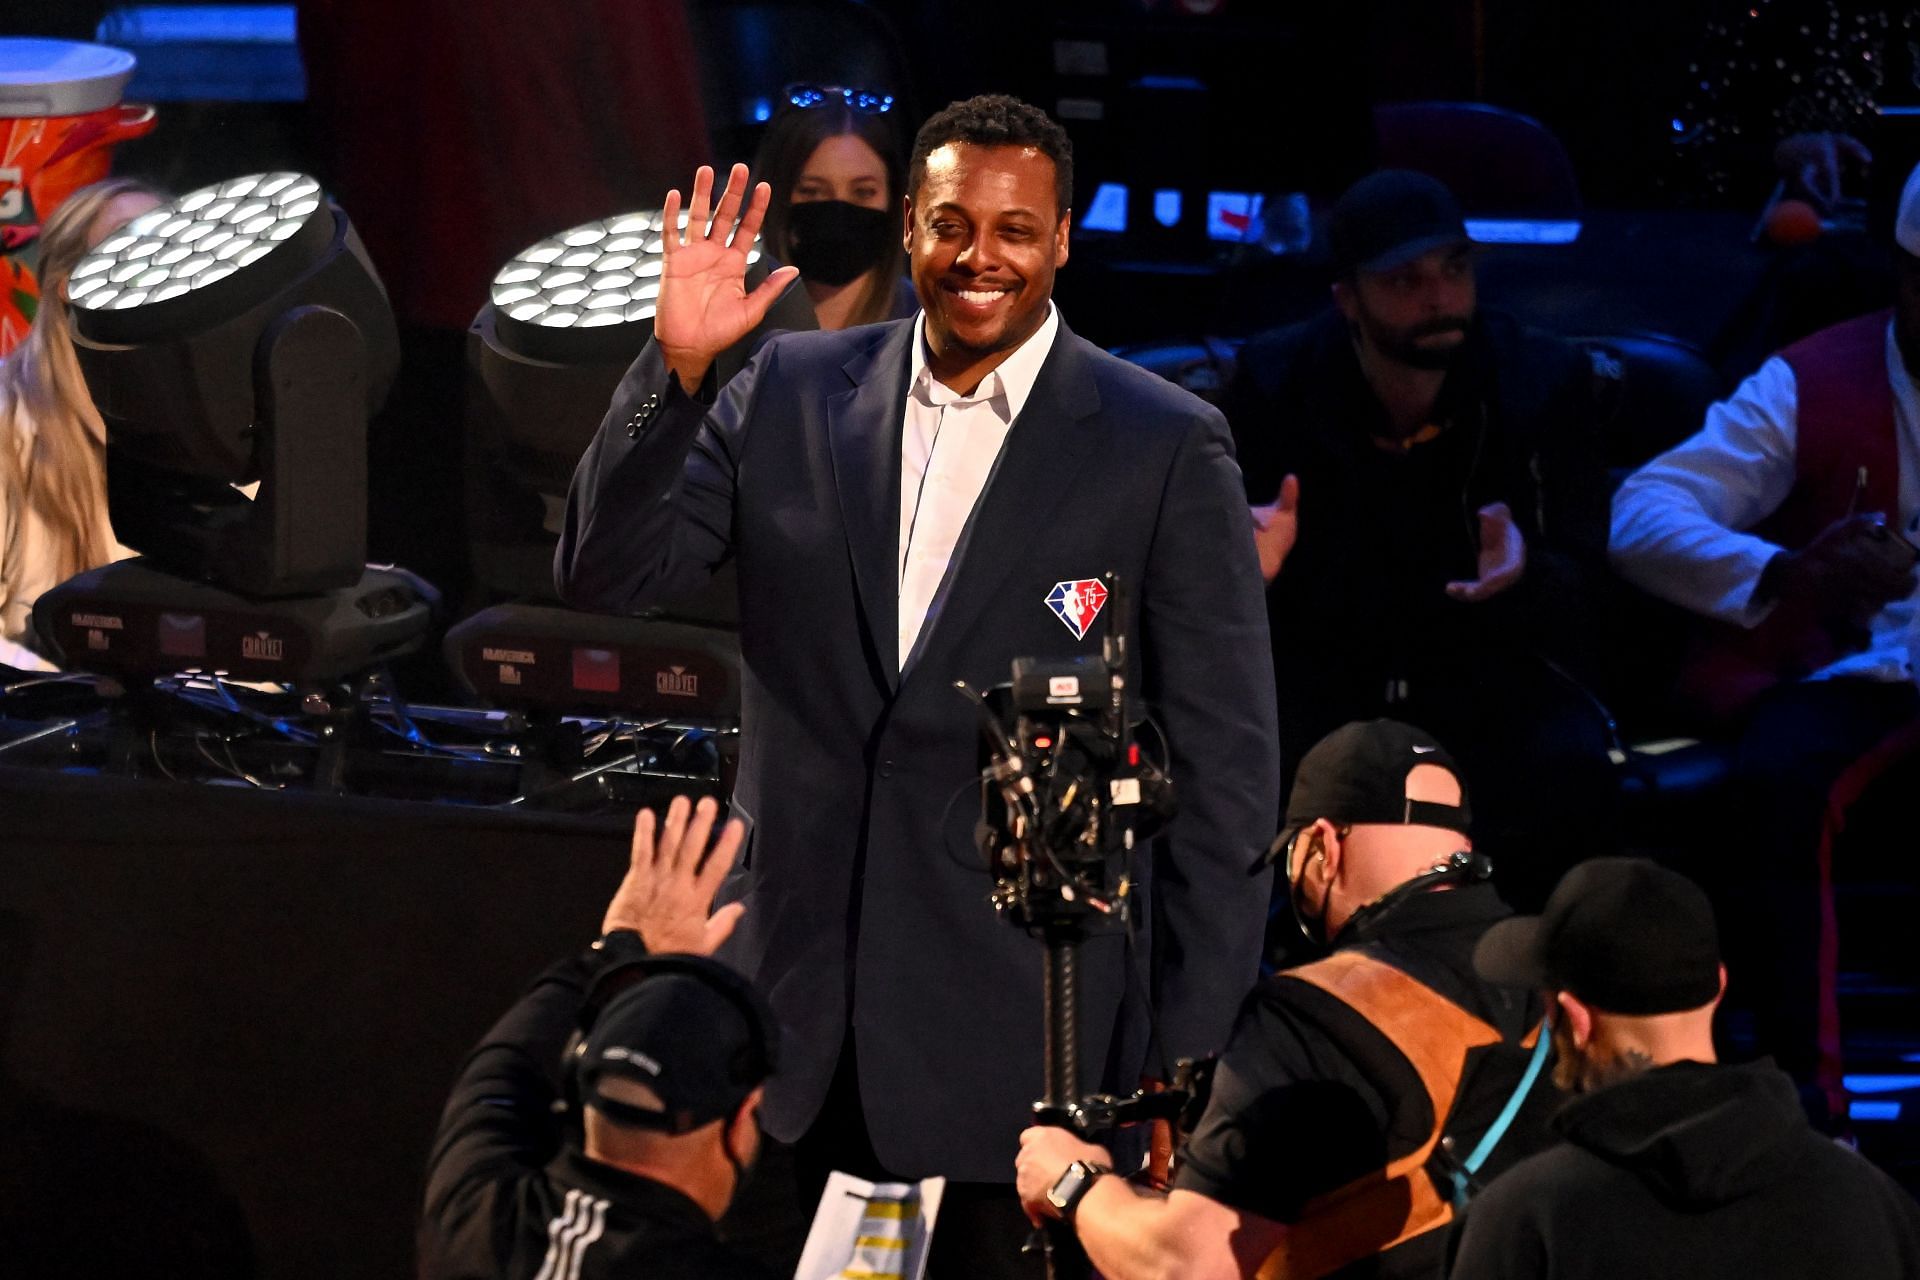 2022 NBA All-Star Game; Paul Pierce being inducted into the NBA 75th Anniversary team